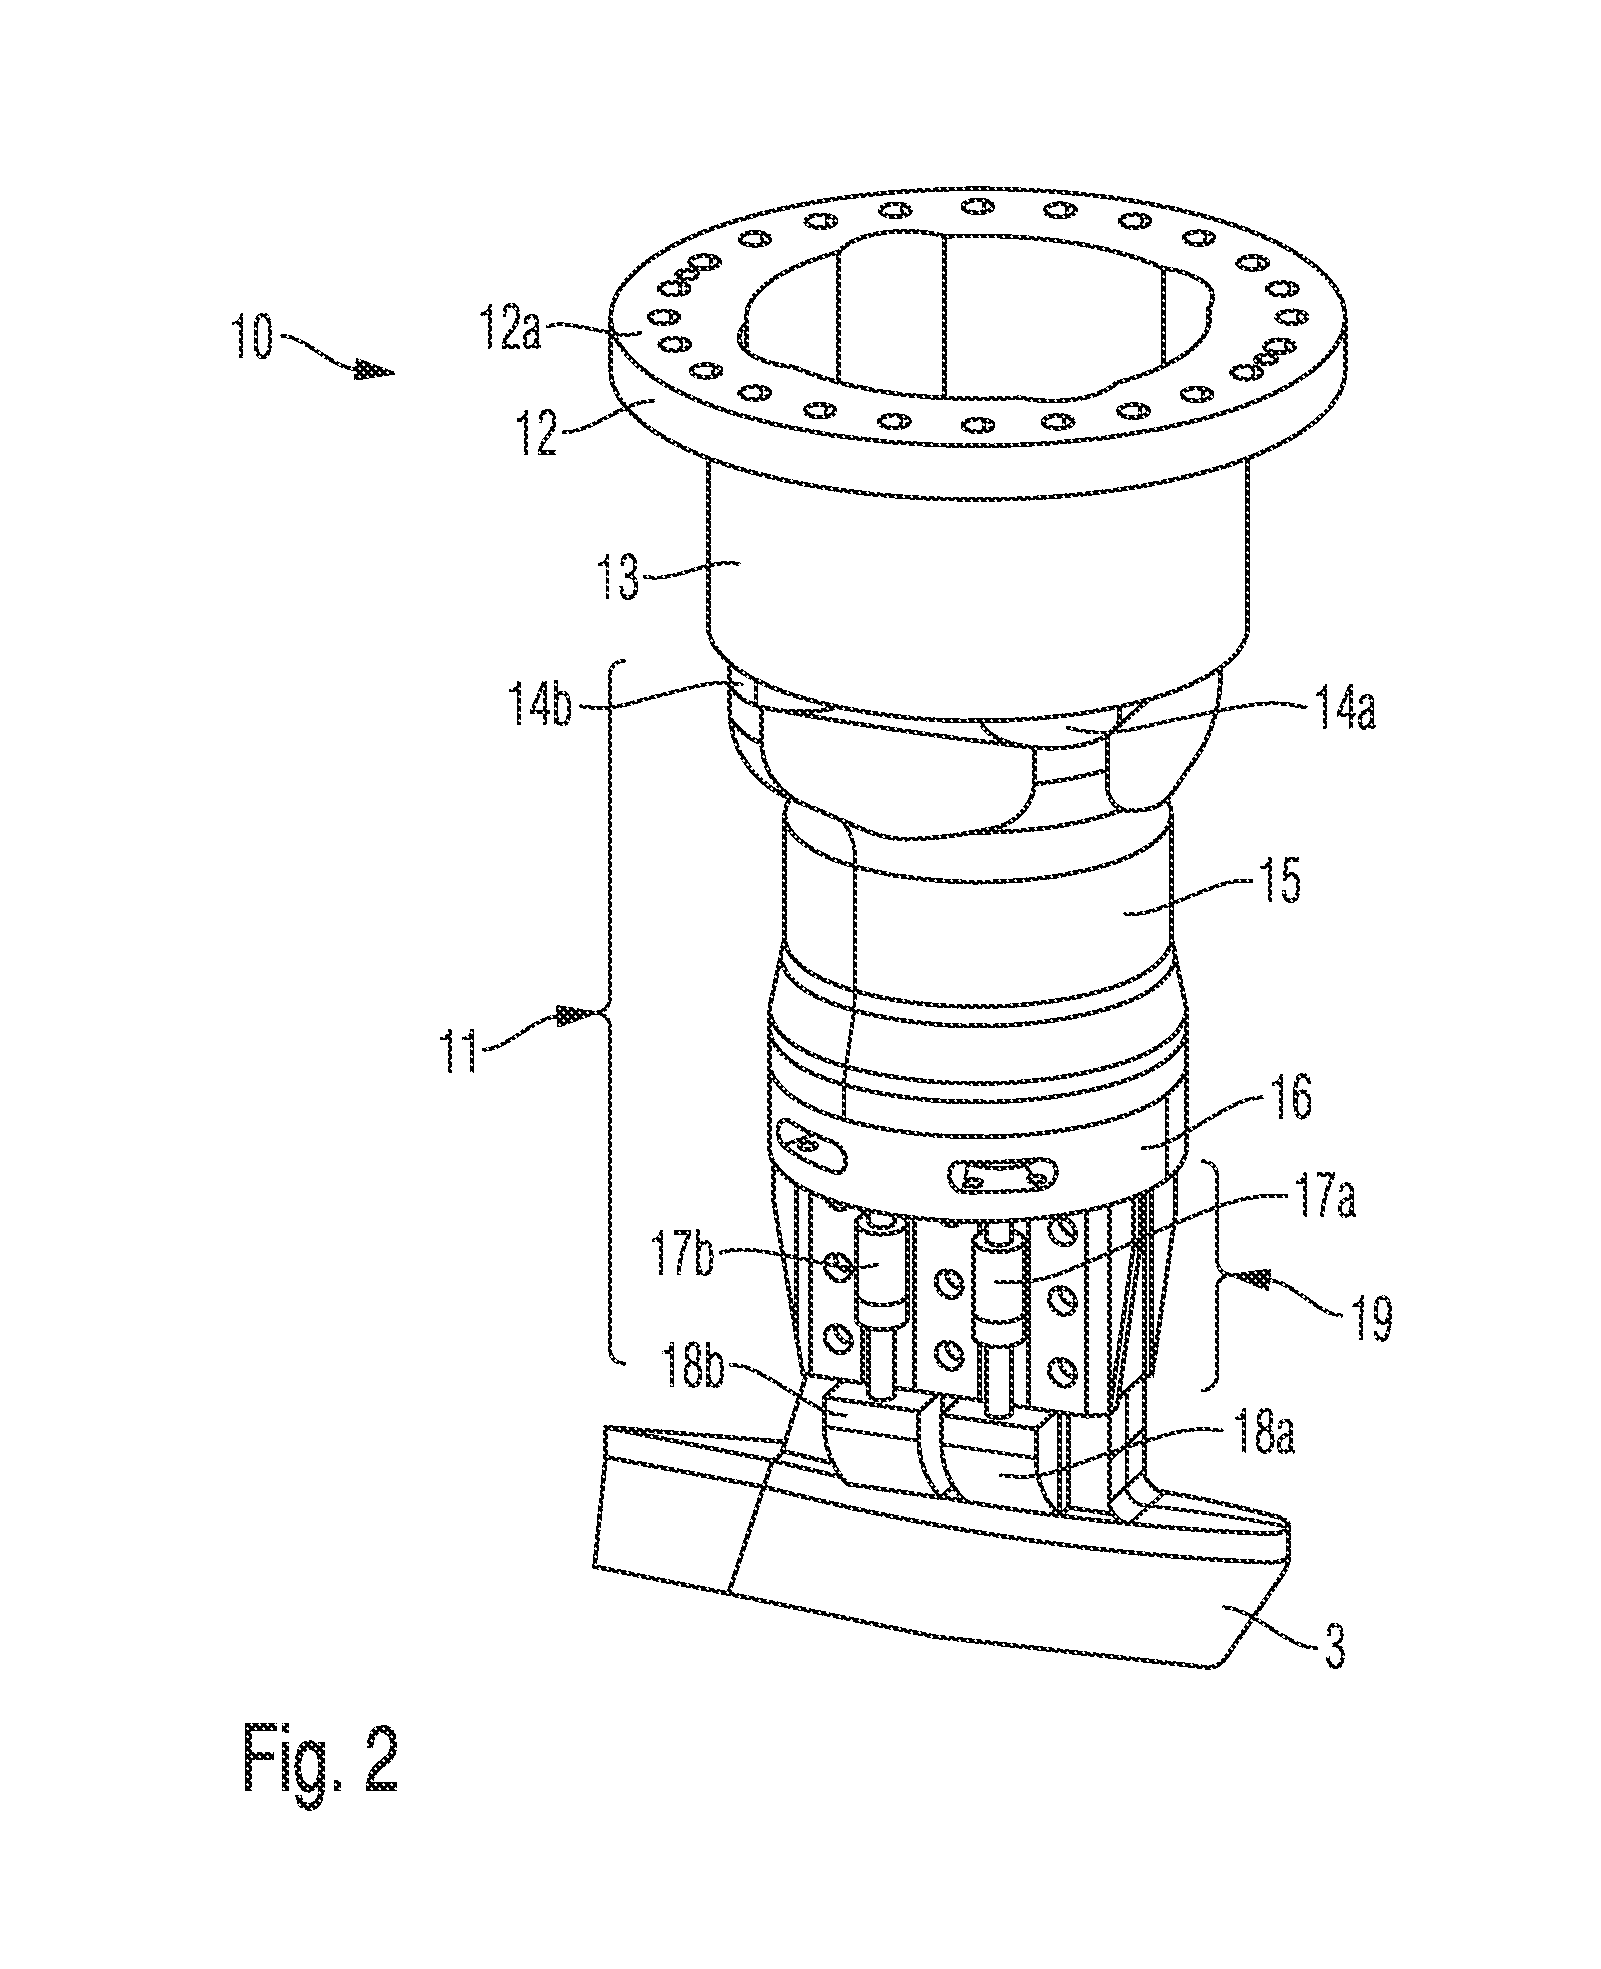 Wind tunnel balance and system with wing model and wind tunnel balance